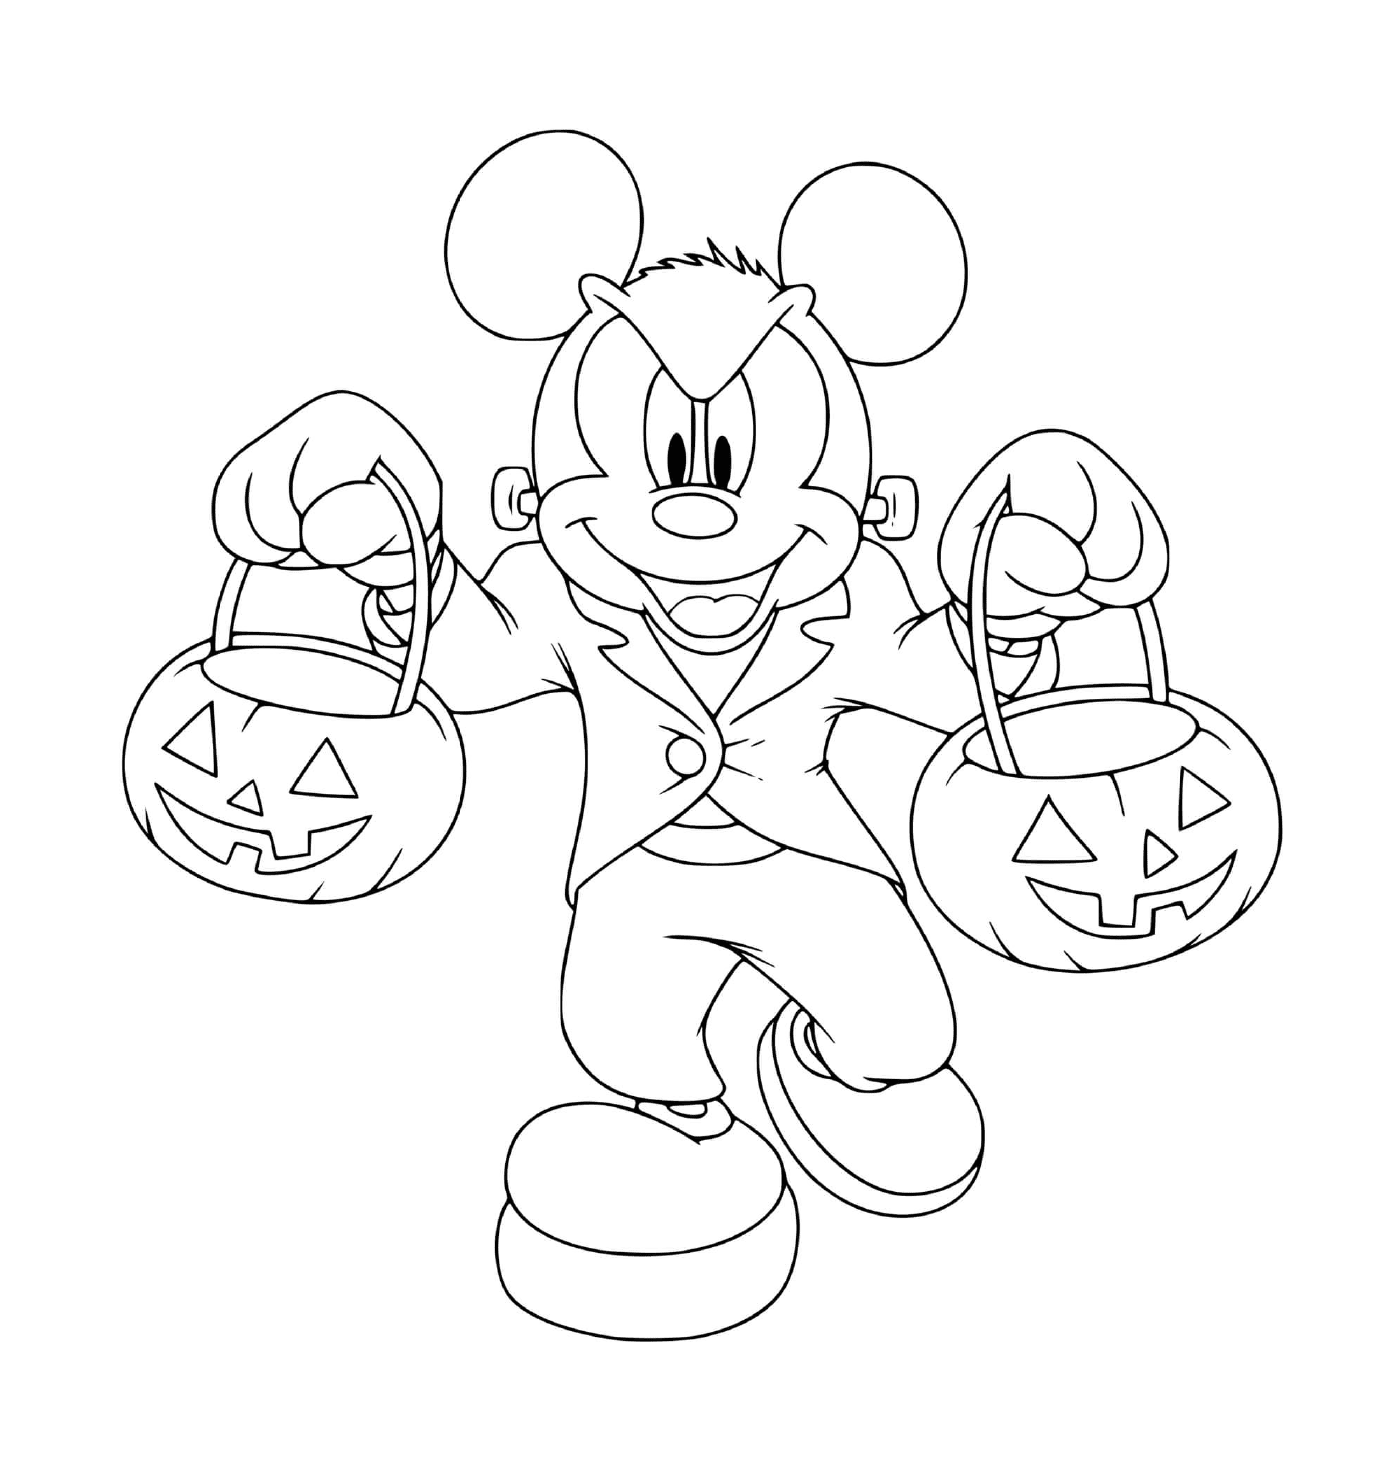   Mickey Mouse Frankenstein zombie monstre 